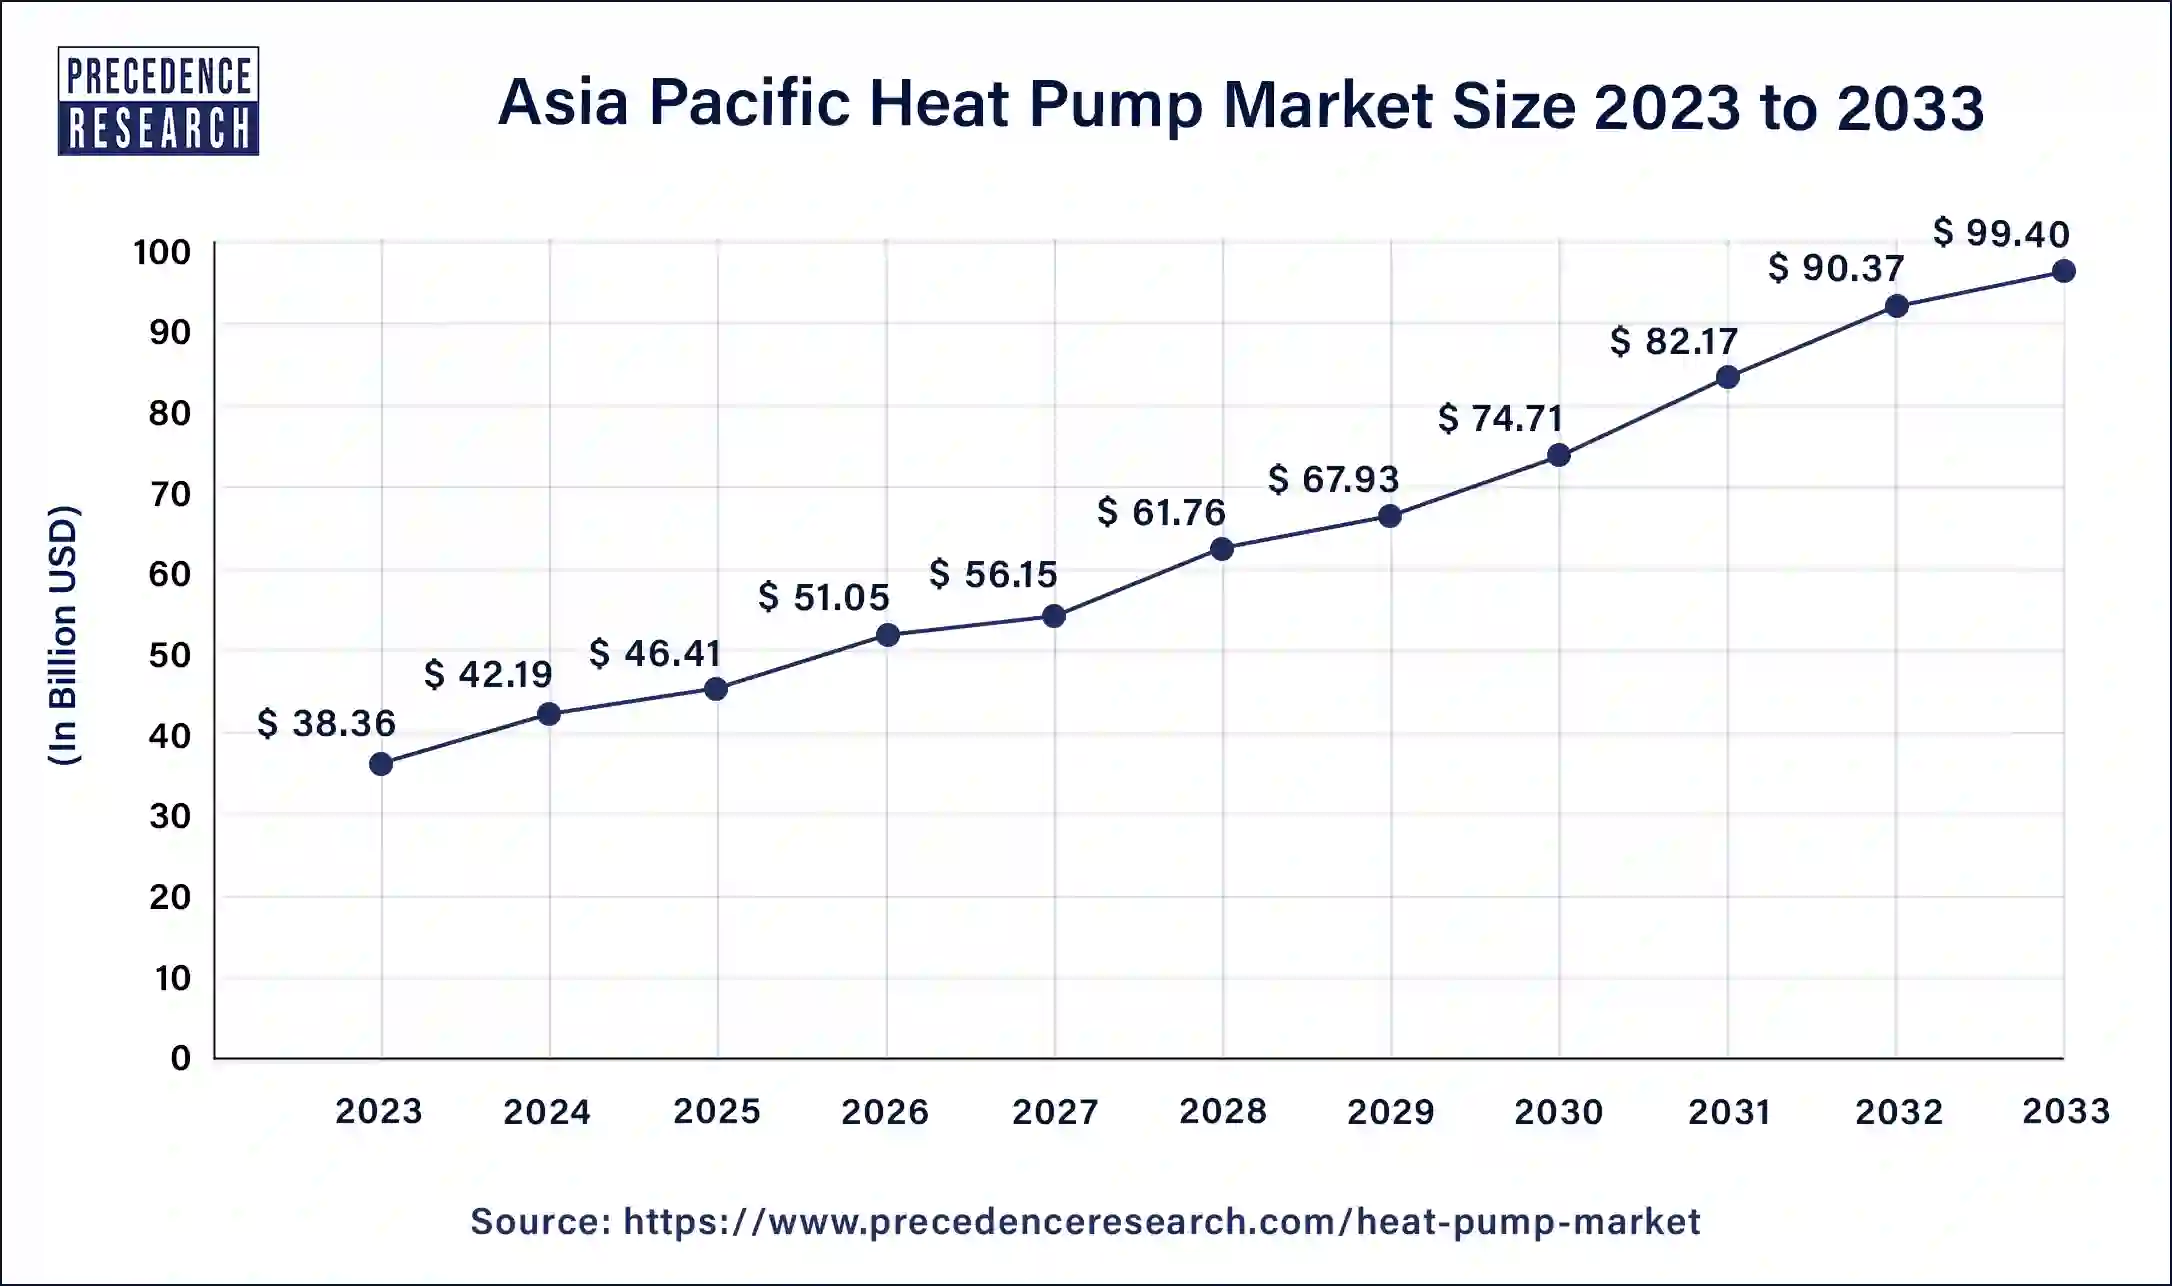 Asia Pacific Heat Pump Market Size 2024 to 2033